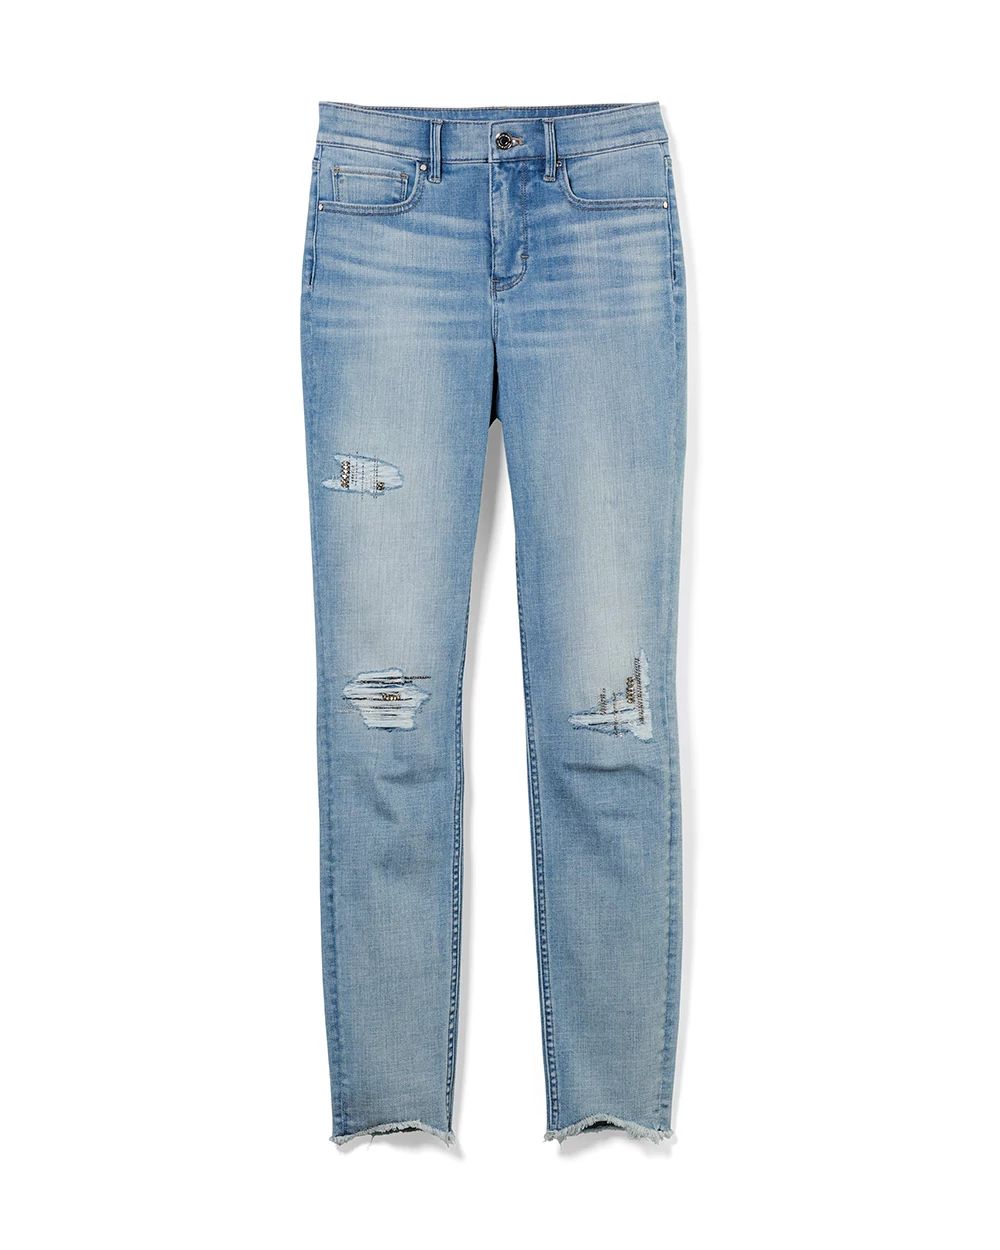 Petite High-Rise Everyday Soft Denim™ Novelty Destructed Skinny Jeans click to view larger image.